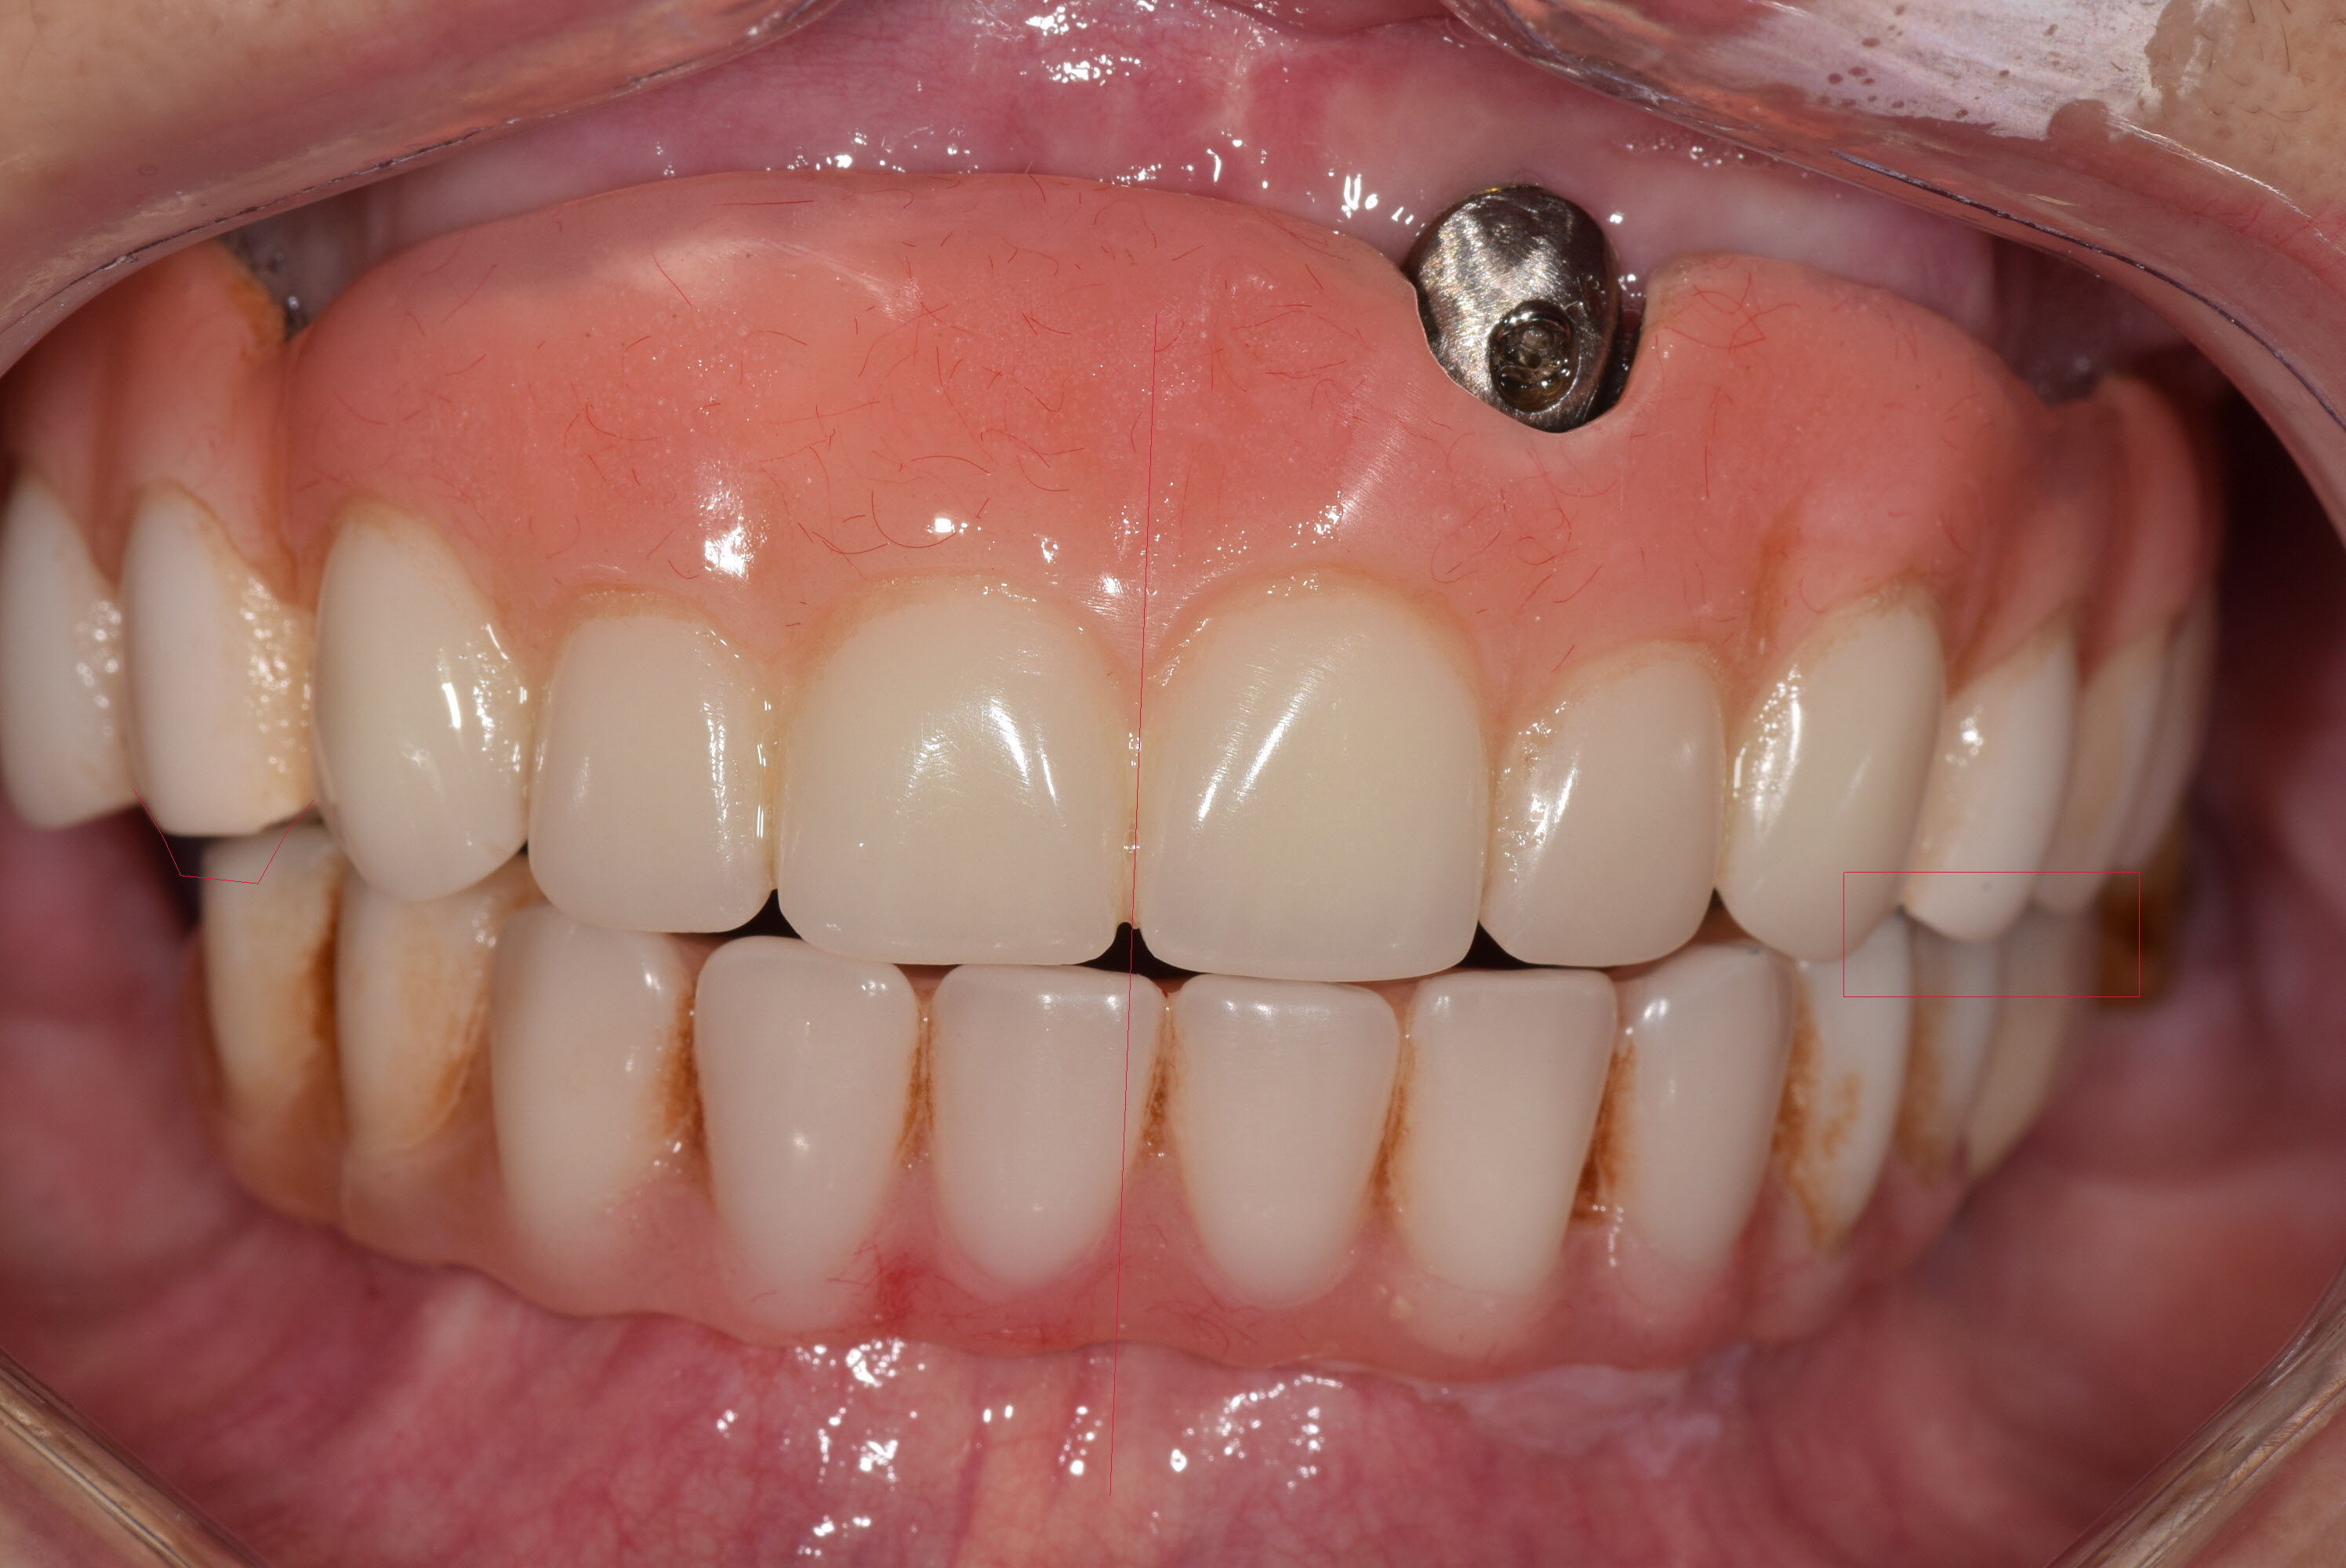 This implant was placed by Dr. Rubinoff